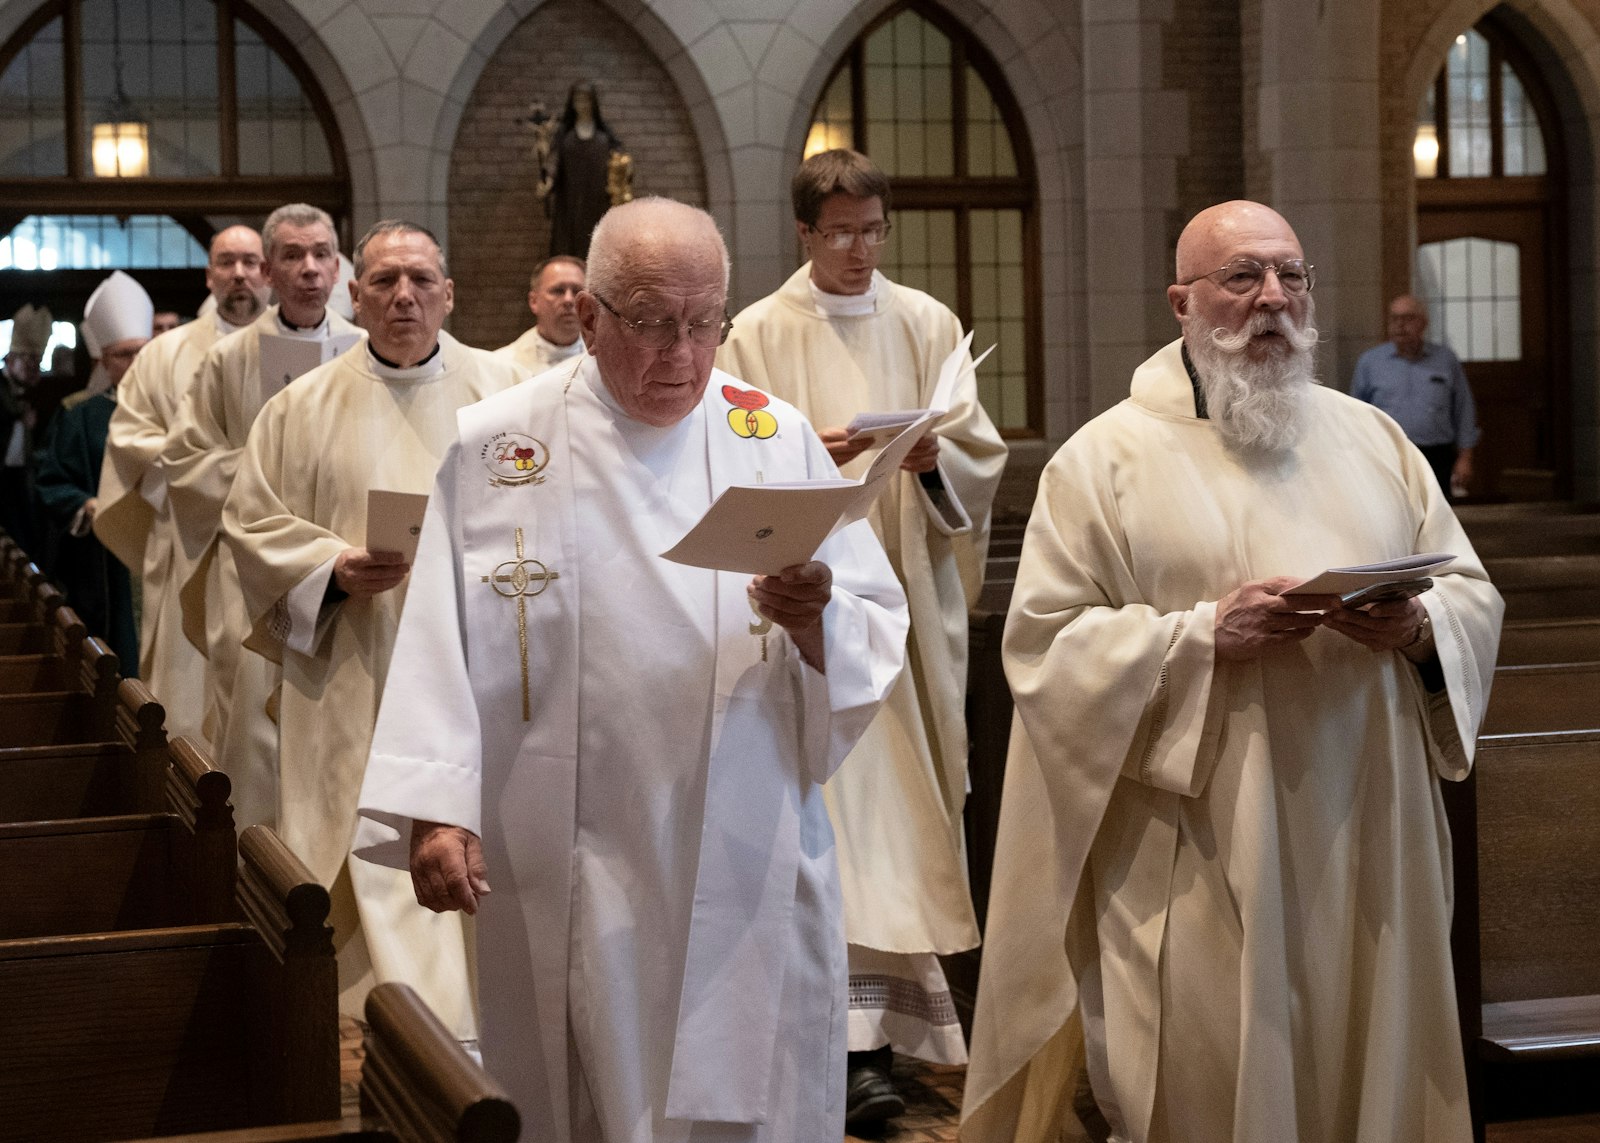 Jubilarian priests process into the chapel at Sacred Heart Major Seminary on June 18 for a special Mass with Archbishop Allen H. Vigneron honoring priests celebrating 25, 30, 40, 50, 60 and 70 years of priesthood. Priests celebrating milestones over 60 years also took part in the celebration.